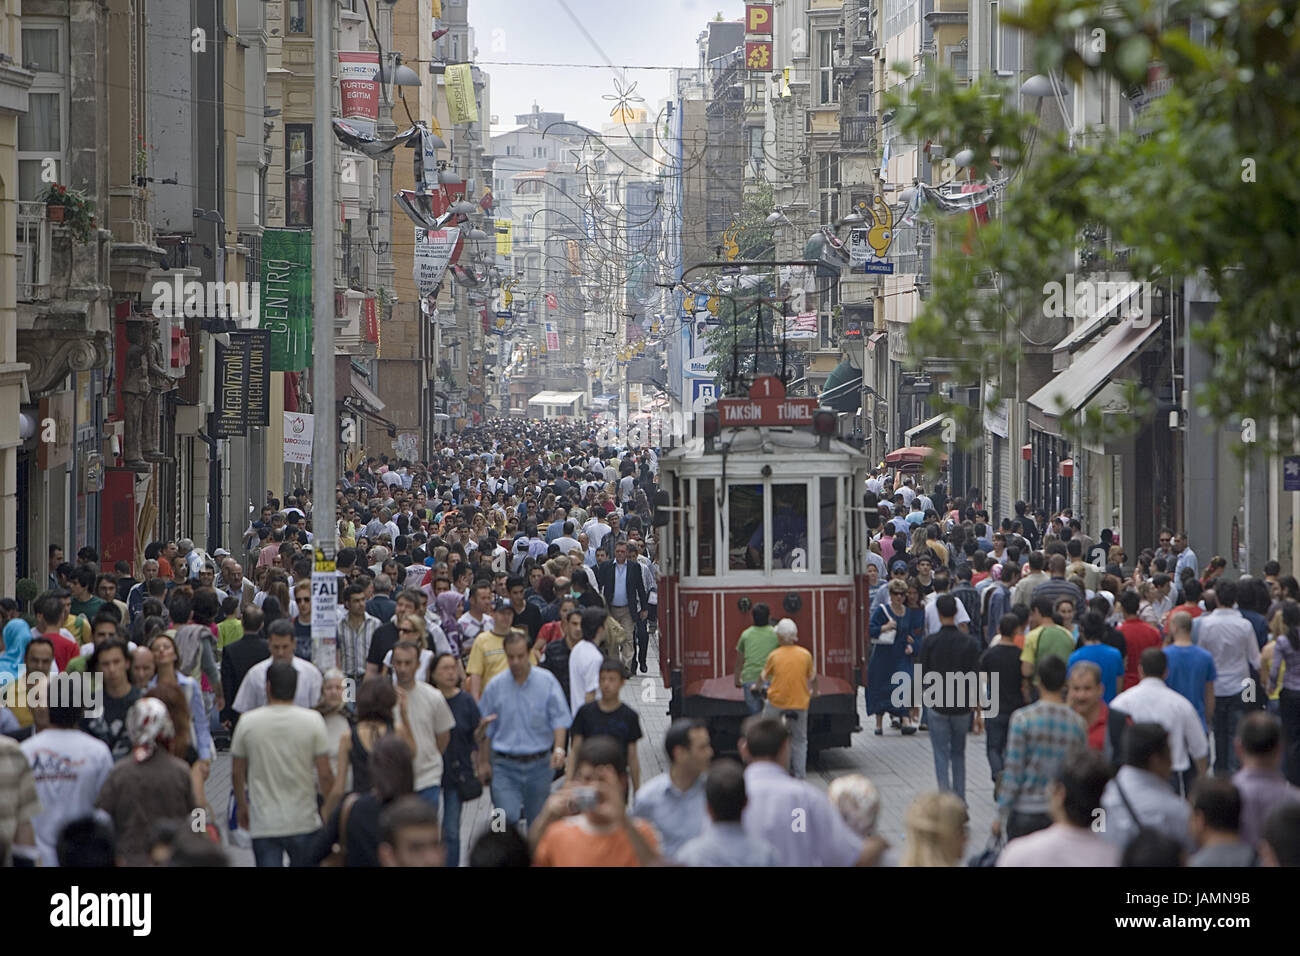 Turkey,Istanbul,part of town of Beyoglu,streetcar,pedestrian area,passer-by,town,city,metropolis,port,place of interest,tourism,architecture,lane,houses,shops,means of transportation,publicly,tram,person,pedestrian,crowd of people,outside, Stock Photo